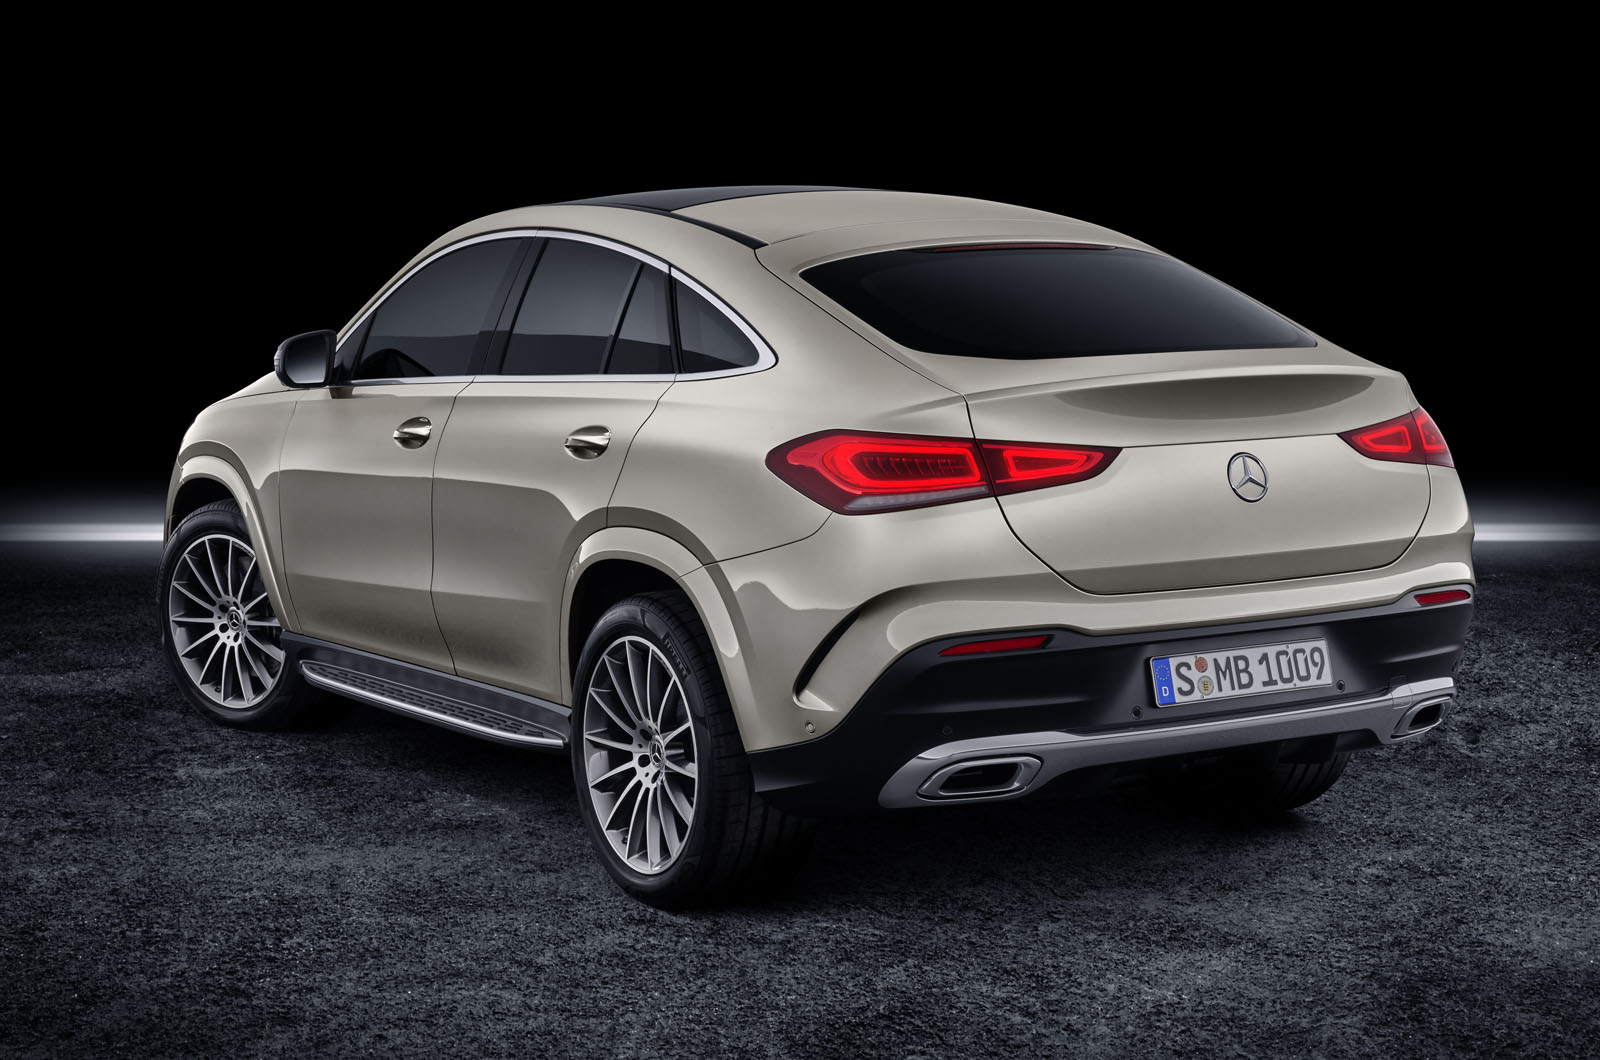 New Mercedes Benz Gle Coupe 4matic On Sale From 72 530 In Uk Autocar